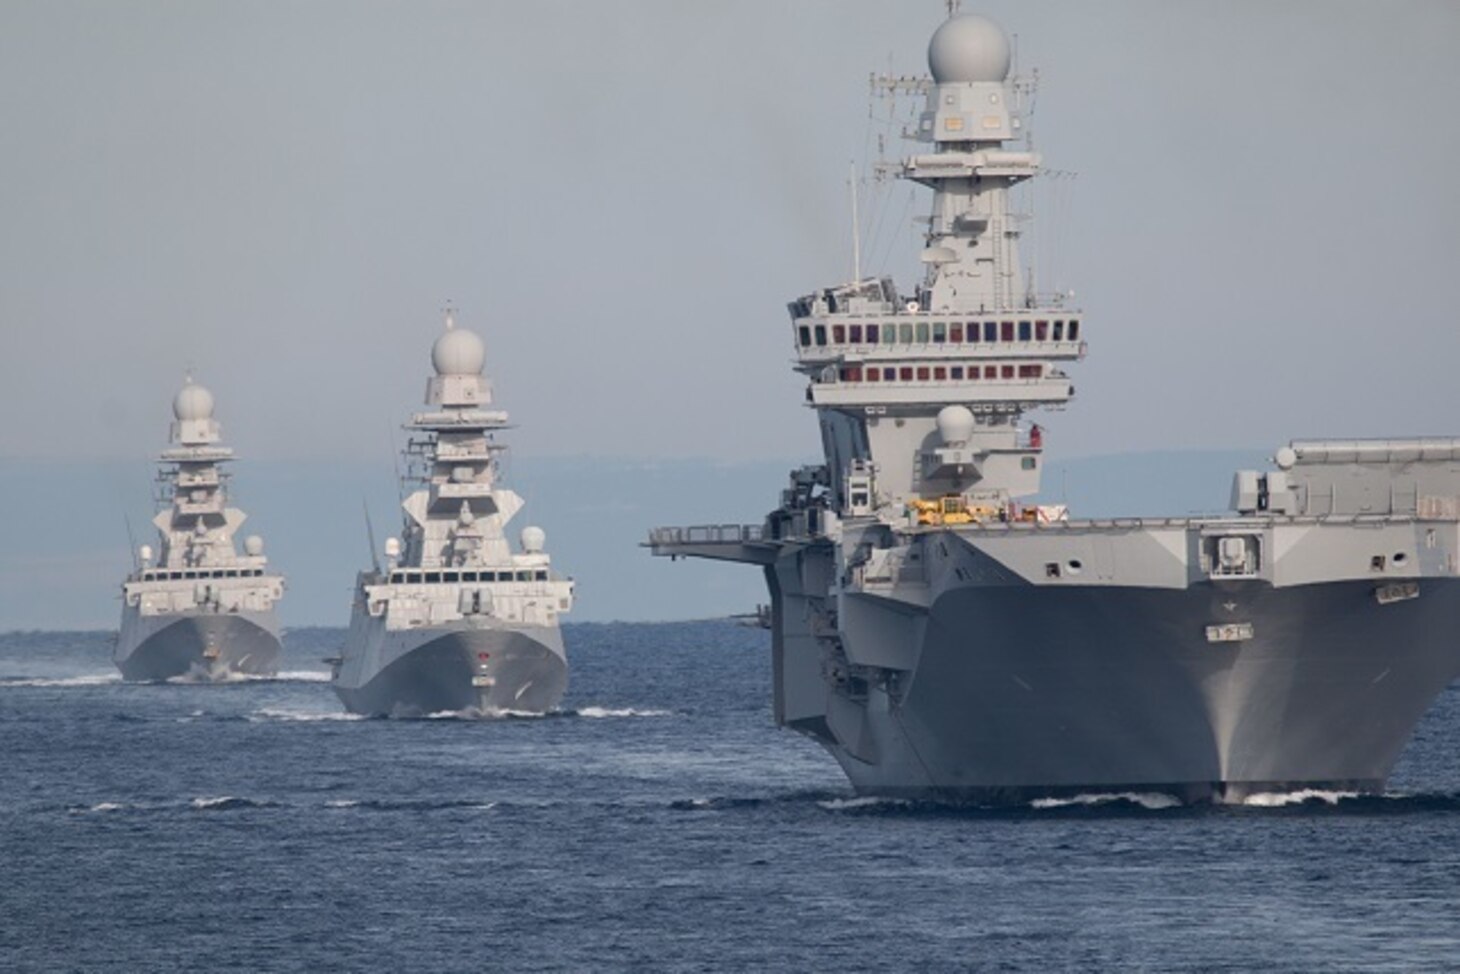 Ships from multiple NATO nations including Italy, Spain, Germany and the United States, participate in Exercise Mare Aperto 22-2, a high-end exercise sponsored by the Italian Navy aimed at strengthening and enhancing the combat readiness of participating assets in the conduct of maritime operations. Forrest Sherman (DDG 98) is the flagship for Standing NATO Maritime Group Two (SNMG2), a multinational integrated task group that projects a constant and visible reminder of the Alliance’s solidarity and cohesion afloat and provides the Alliance with a continuous maritime capability to perform a wide range of tasks, including exercises and real-world operations in periods of crisis and conflict.